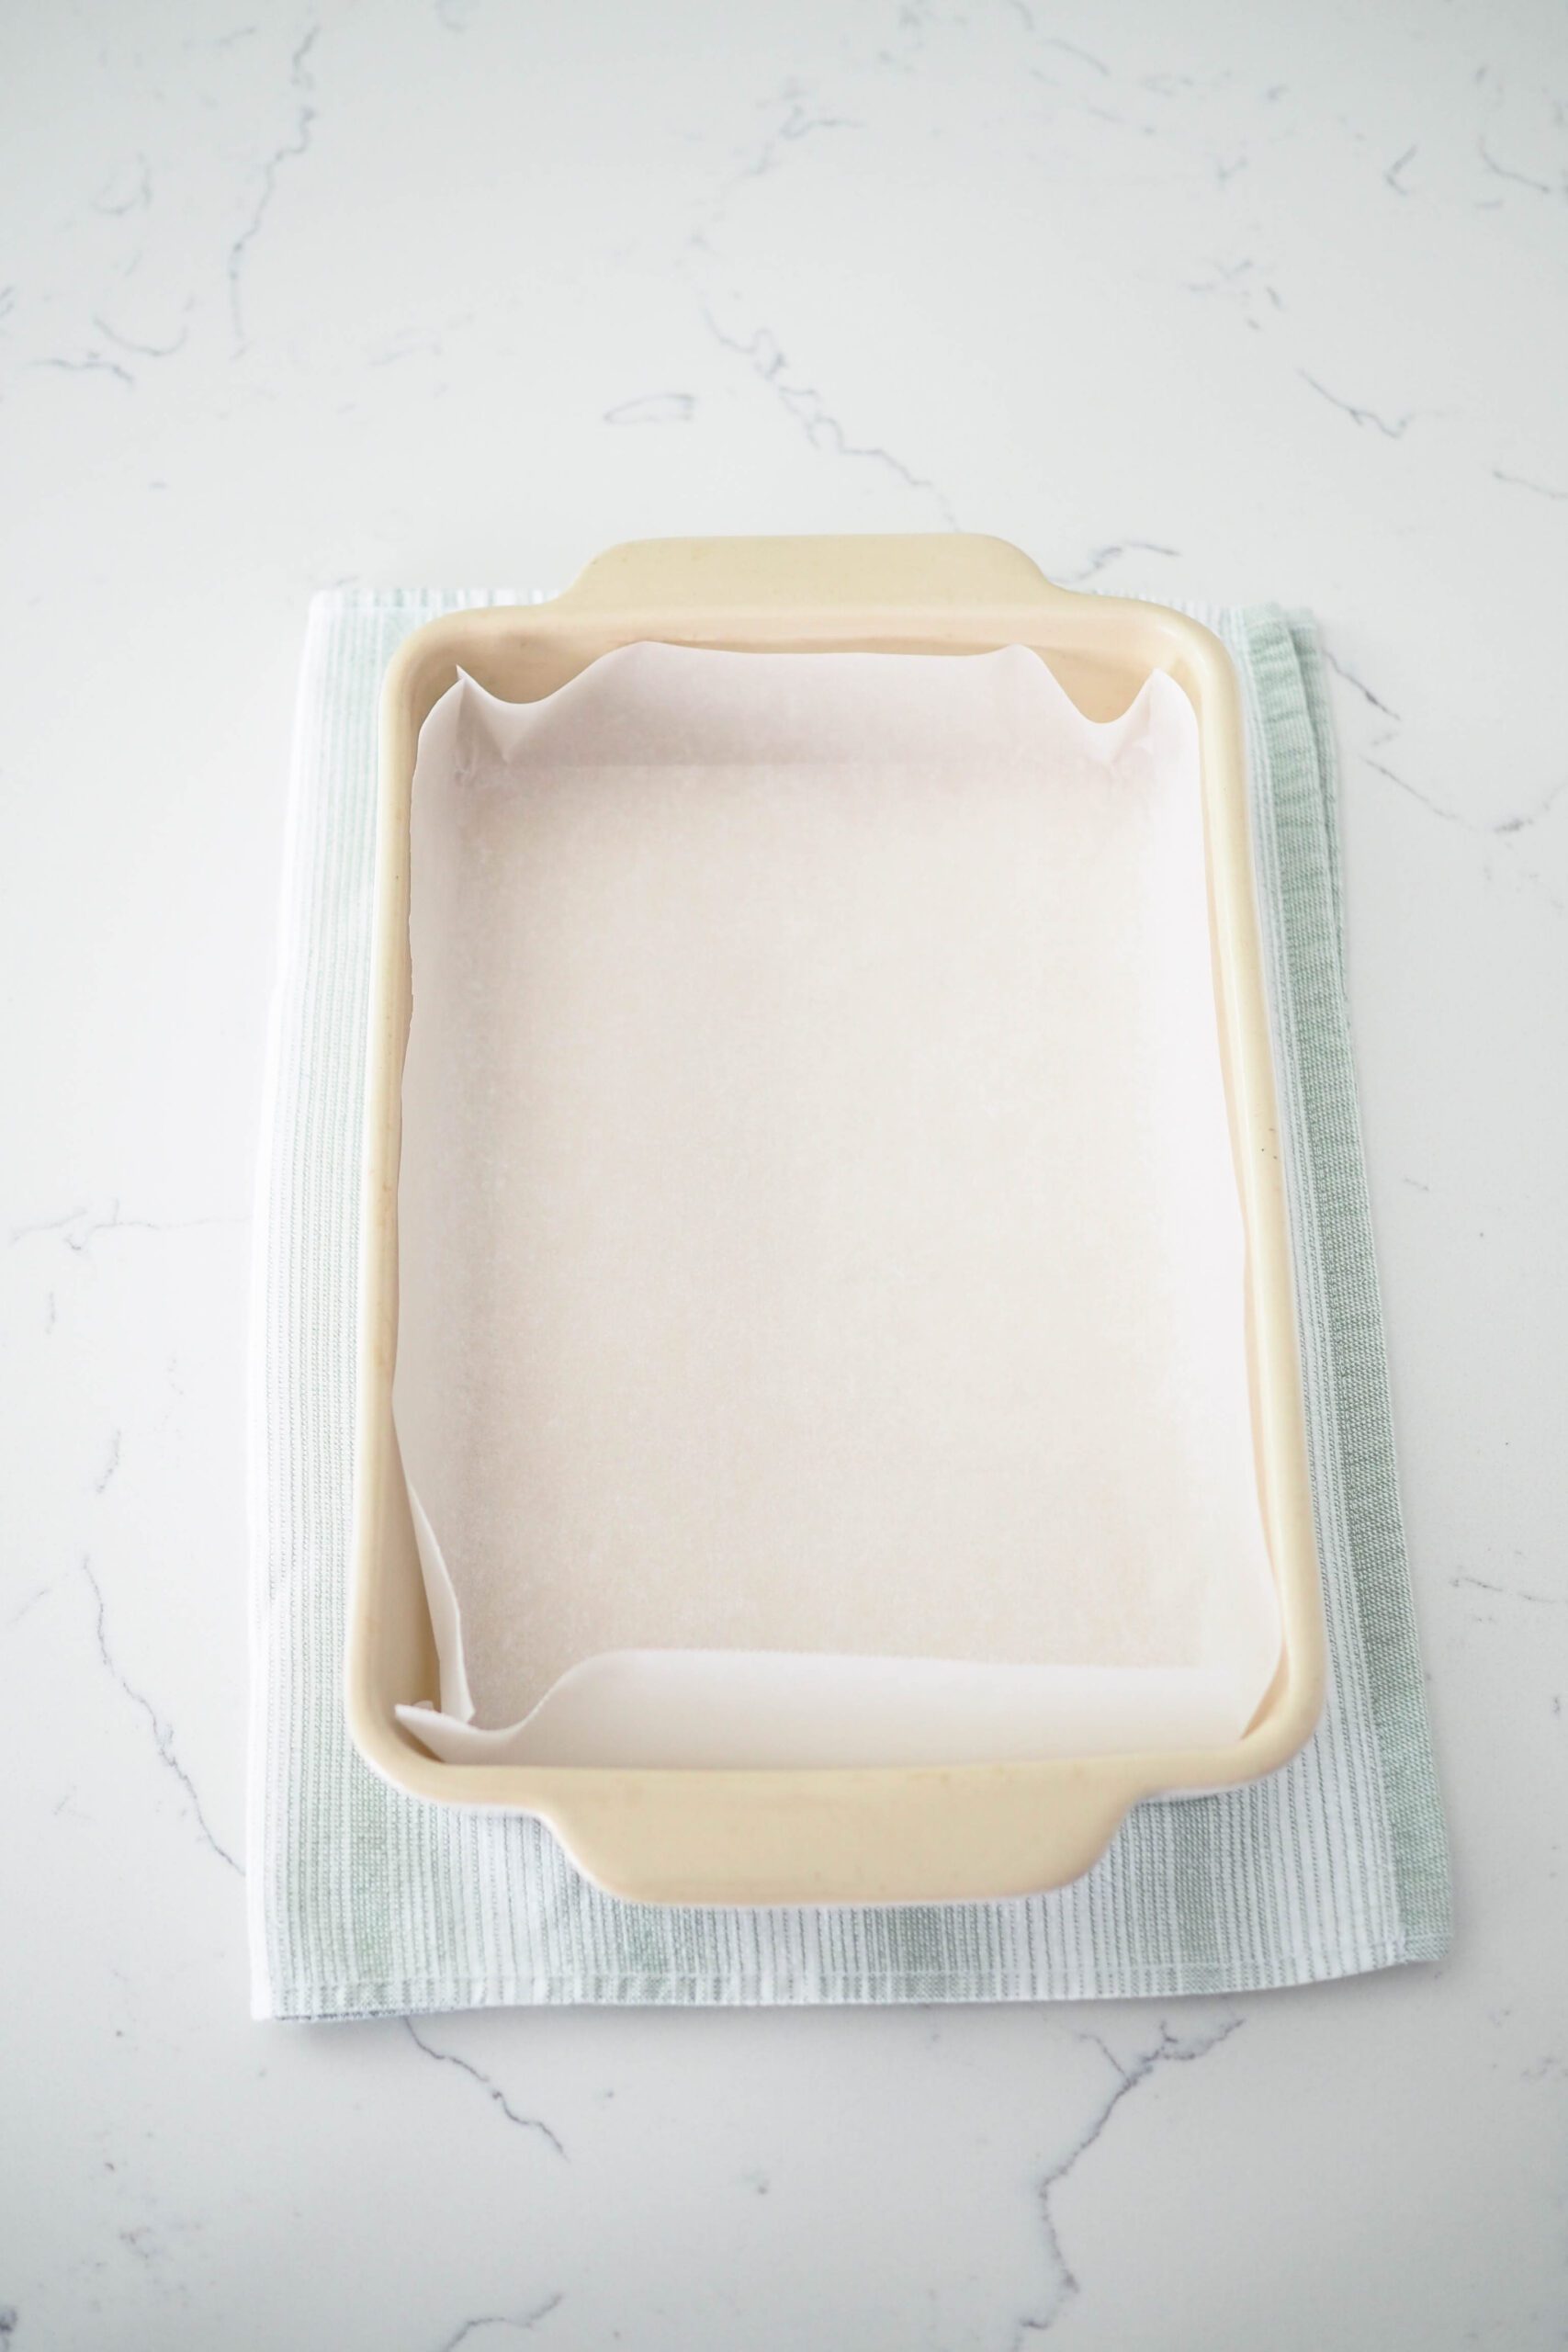 A stoneware baking dish is lined with parchment paper.